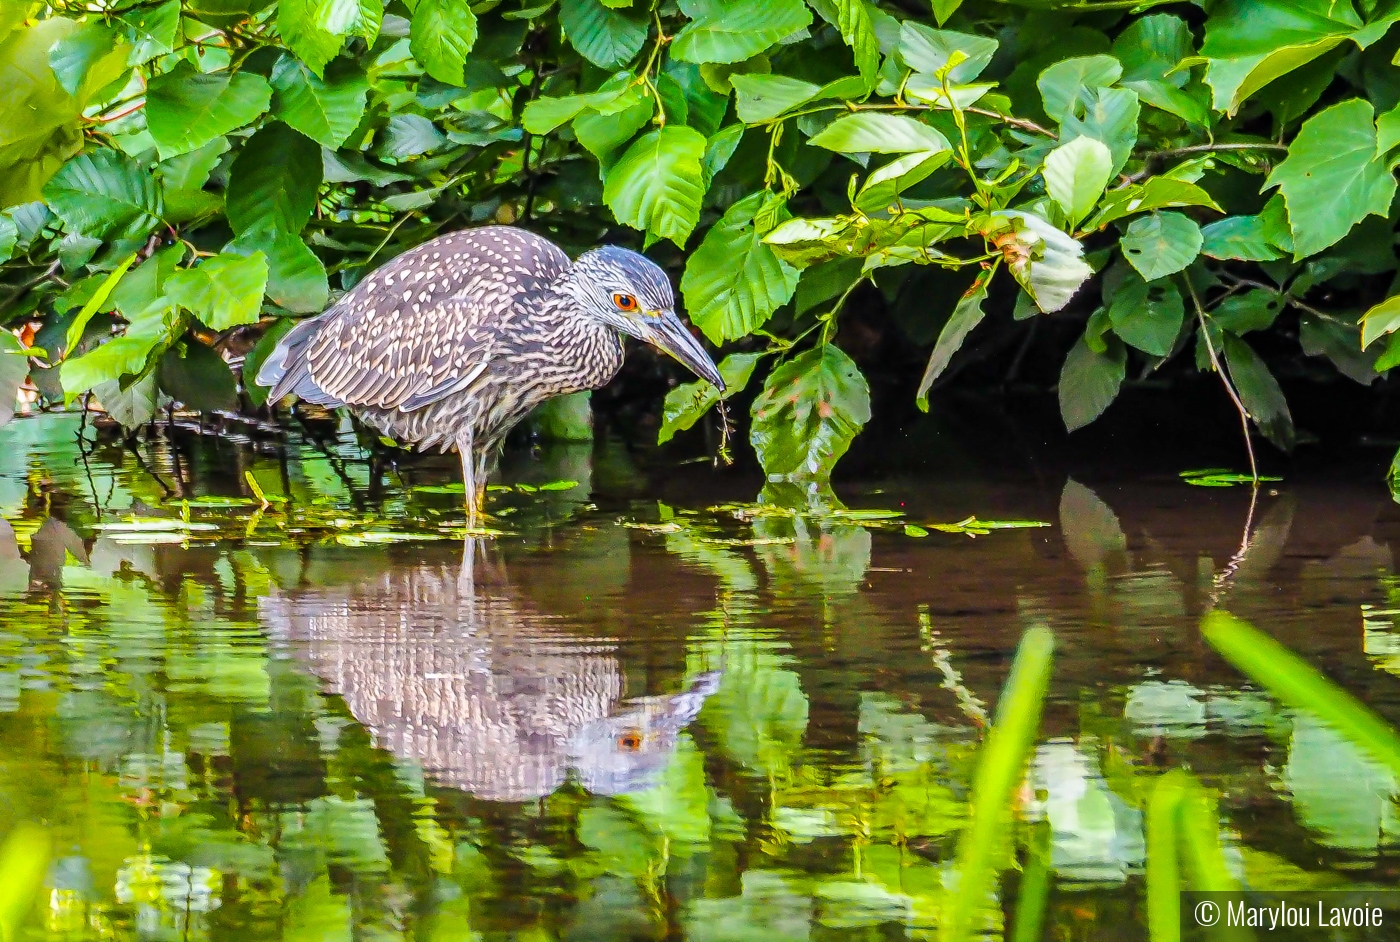 Juvenile Night Heron by Marylou Lavoie